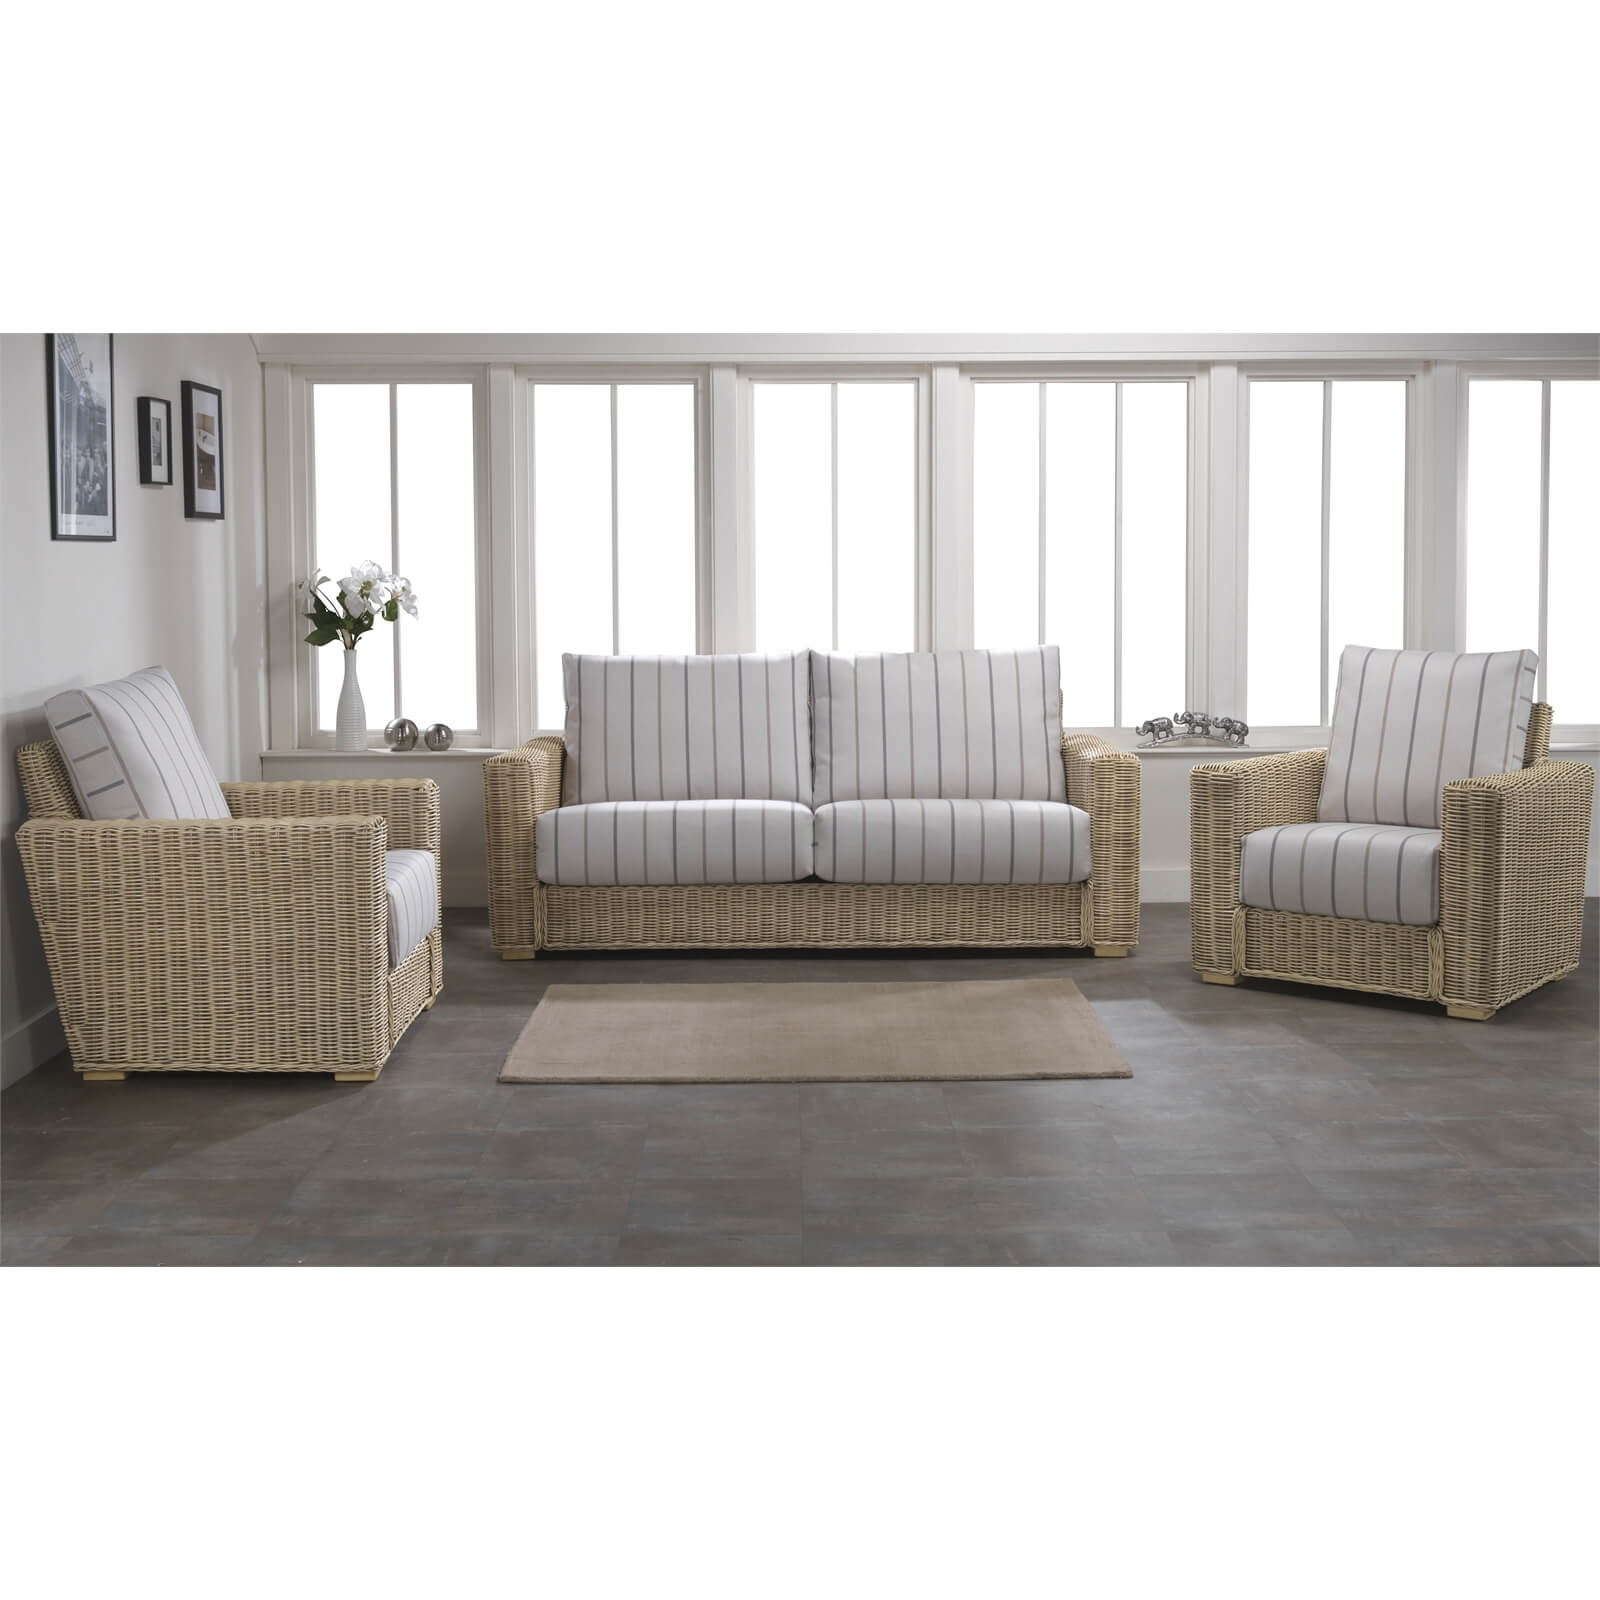 Burford 3 Seater Sofa In Linen Taupe